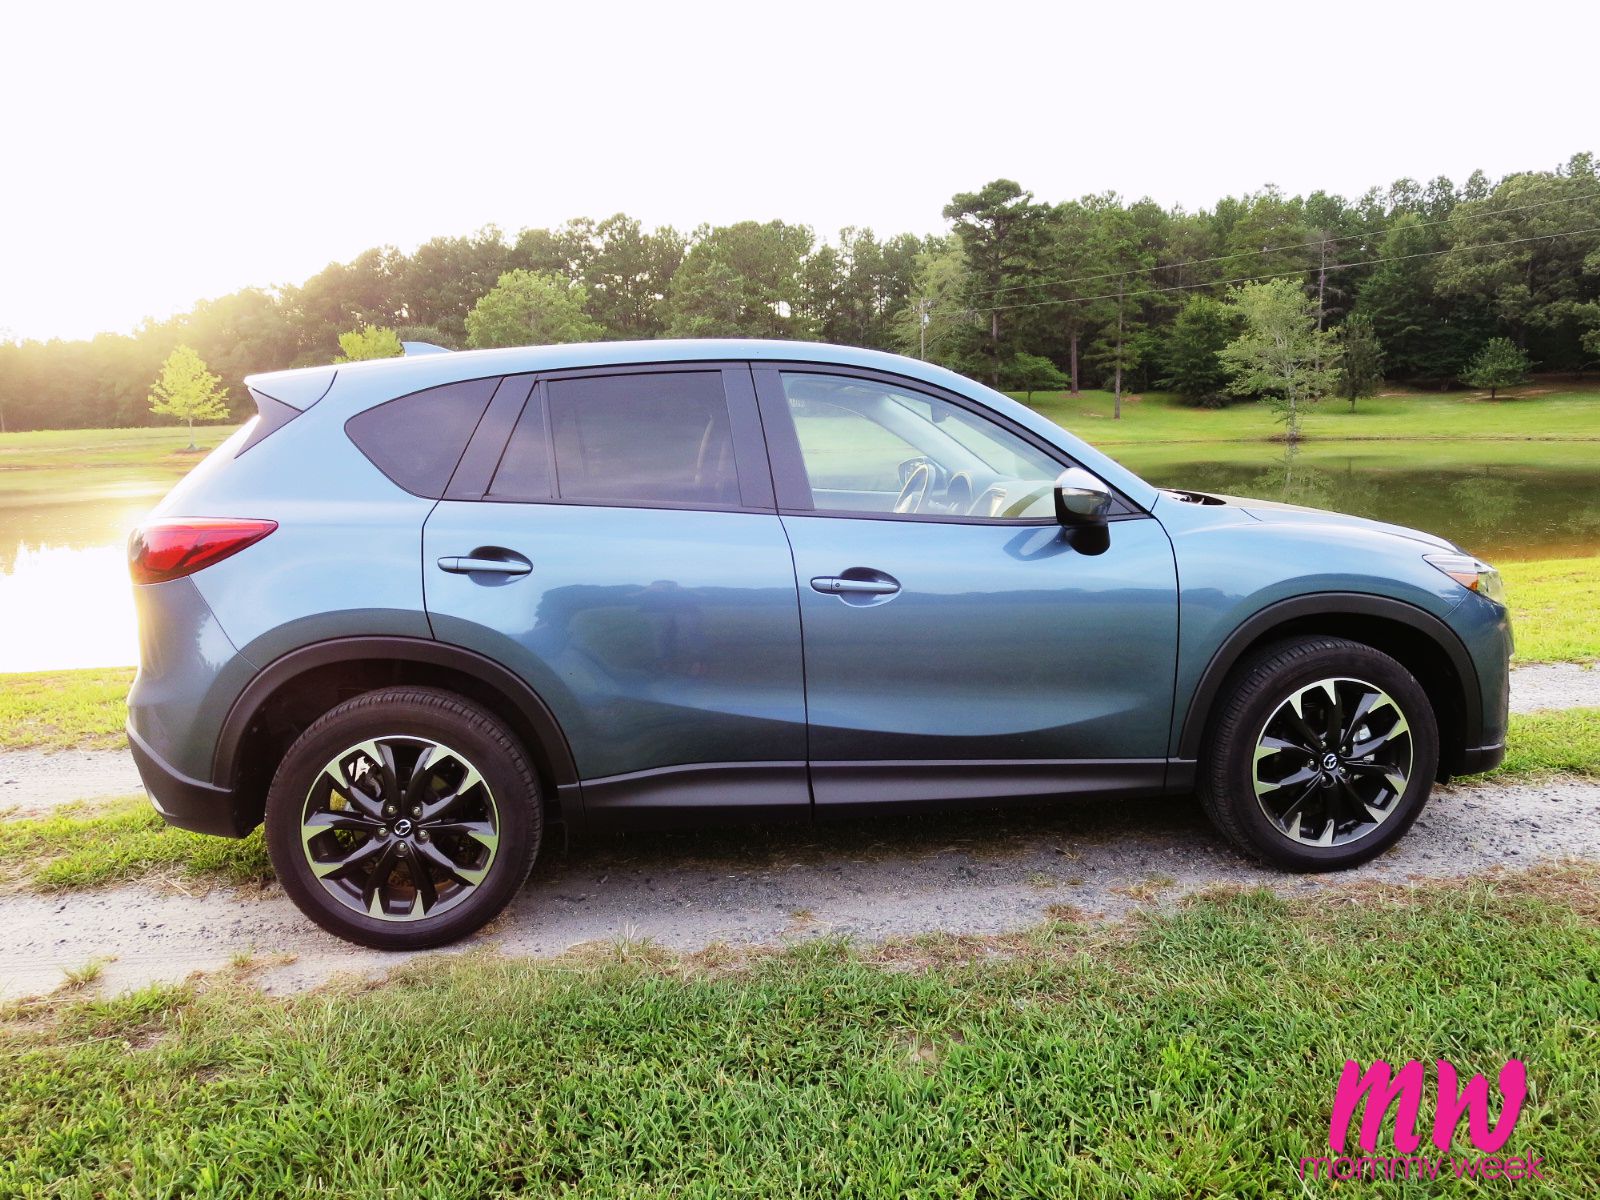 Awesome Mazda 2017: 2016 Mazda CX-5 Review from a Mom's Perspective Cars  Check more at